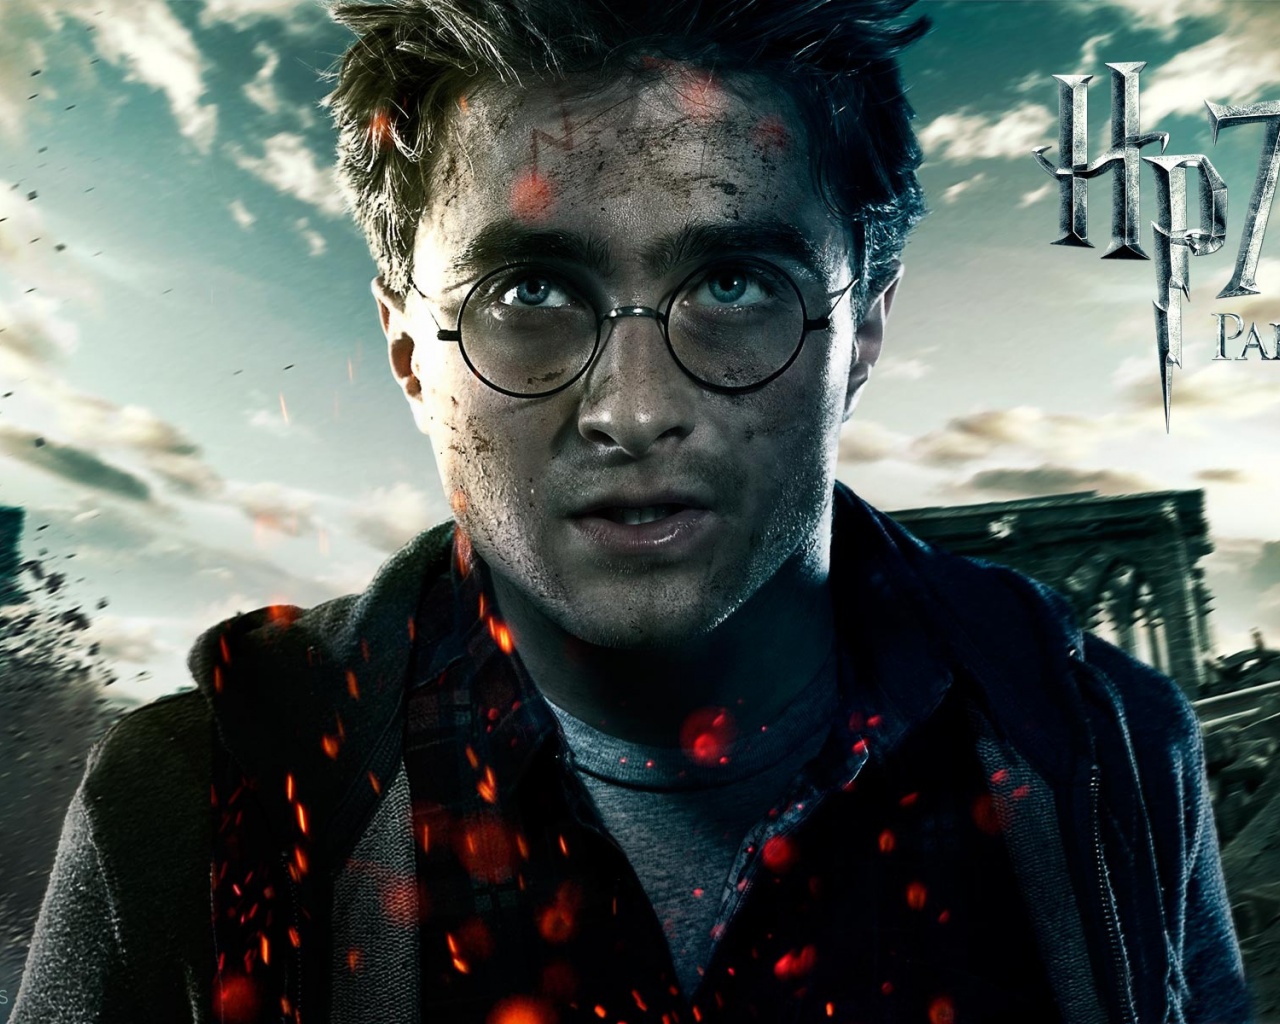 Harry Potter And The Deathly Hallows Part 2 Wallpaper